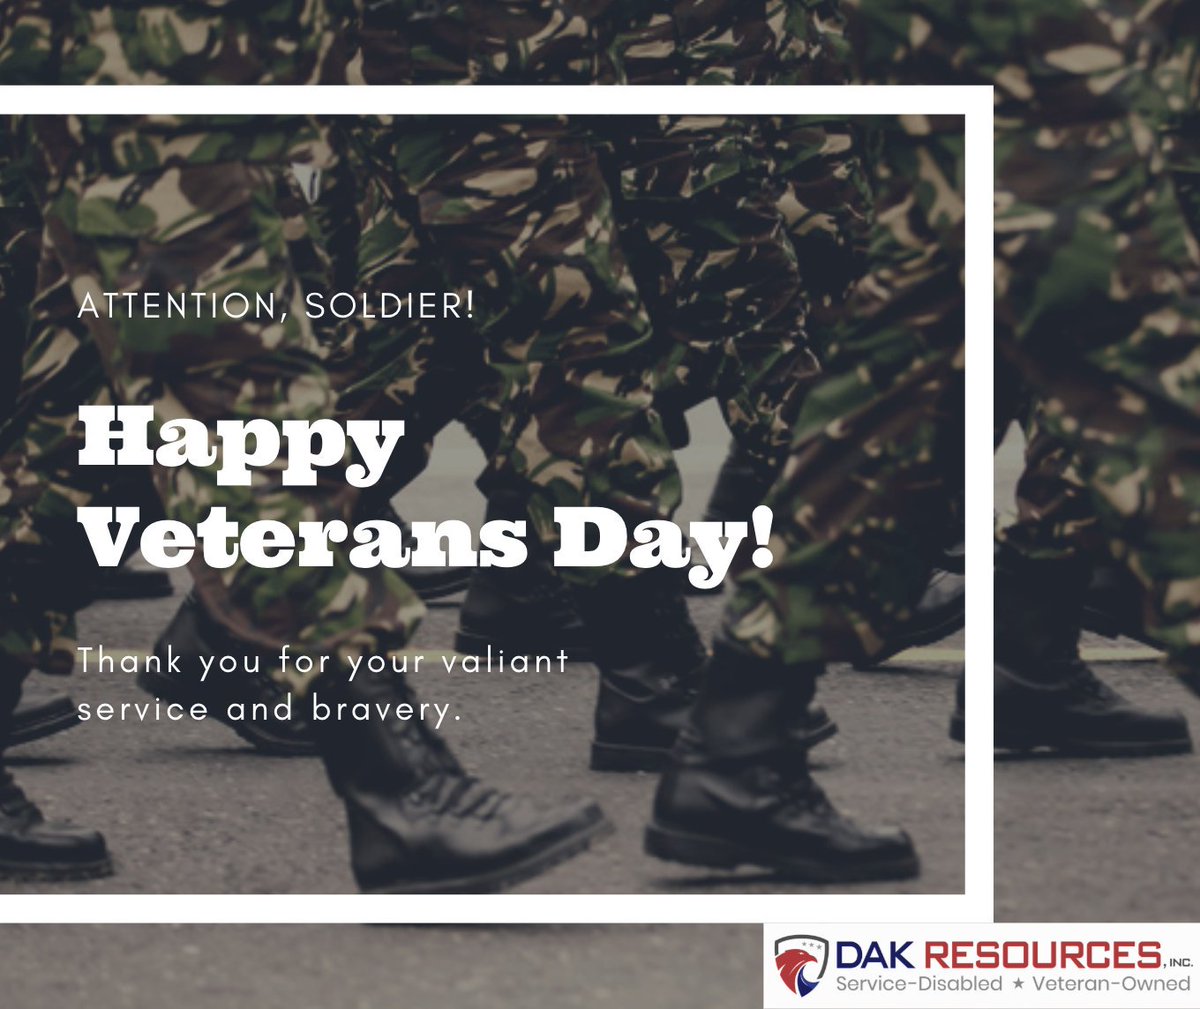 #HappyVeteransDay #DAKResources #VeteranOwned #ServiceDisabled #SupportCivilianJobs